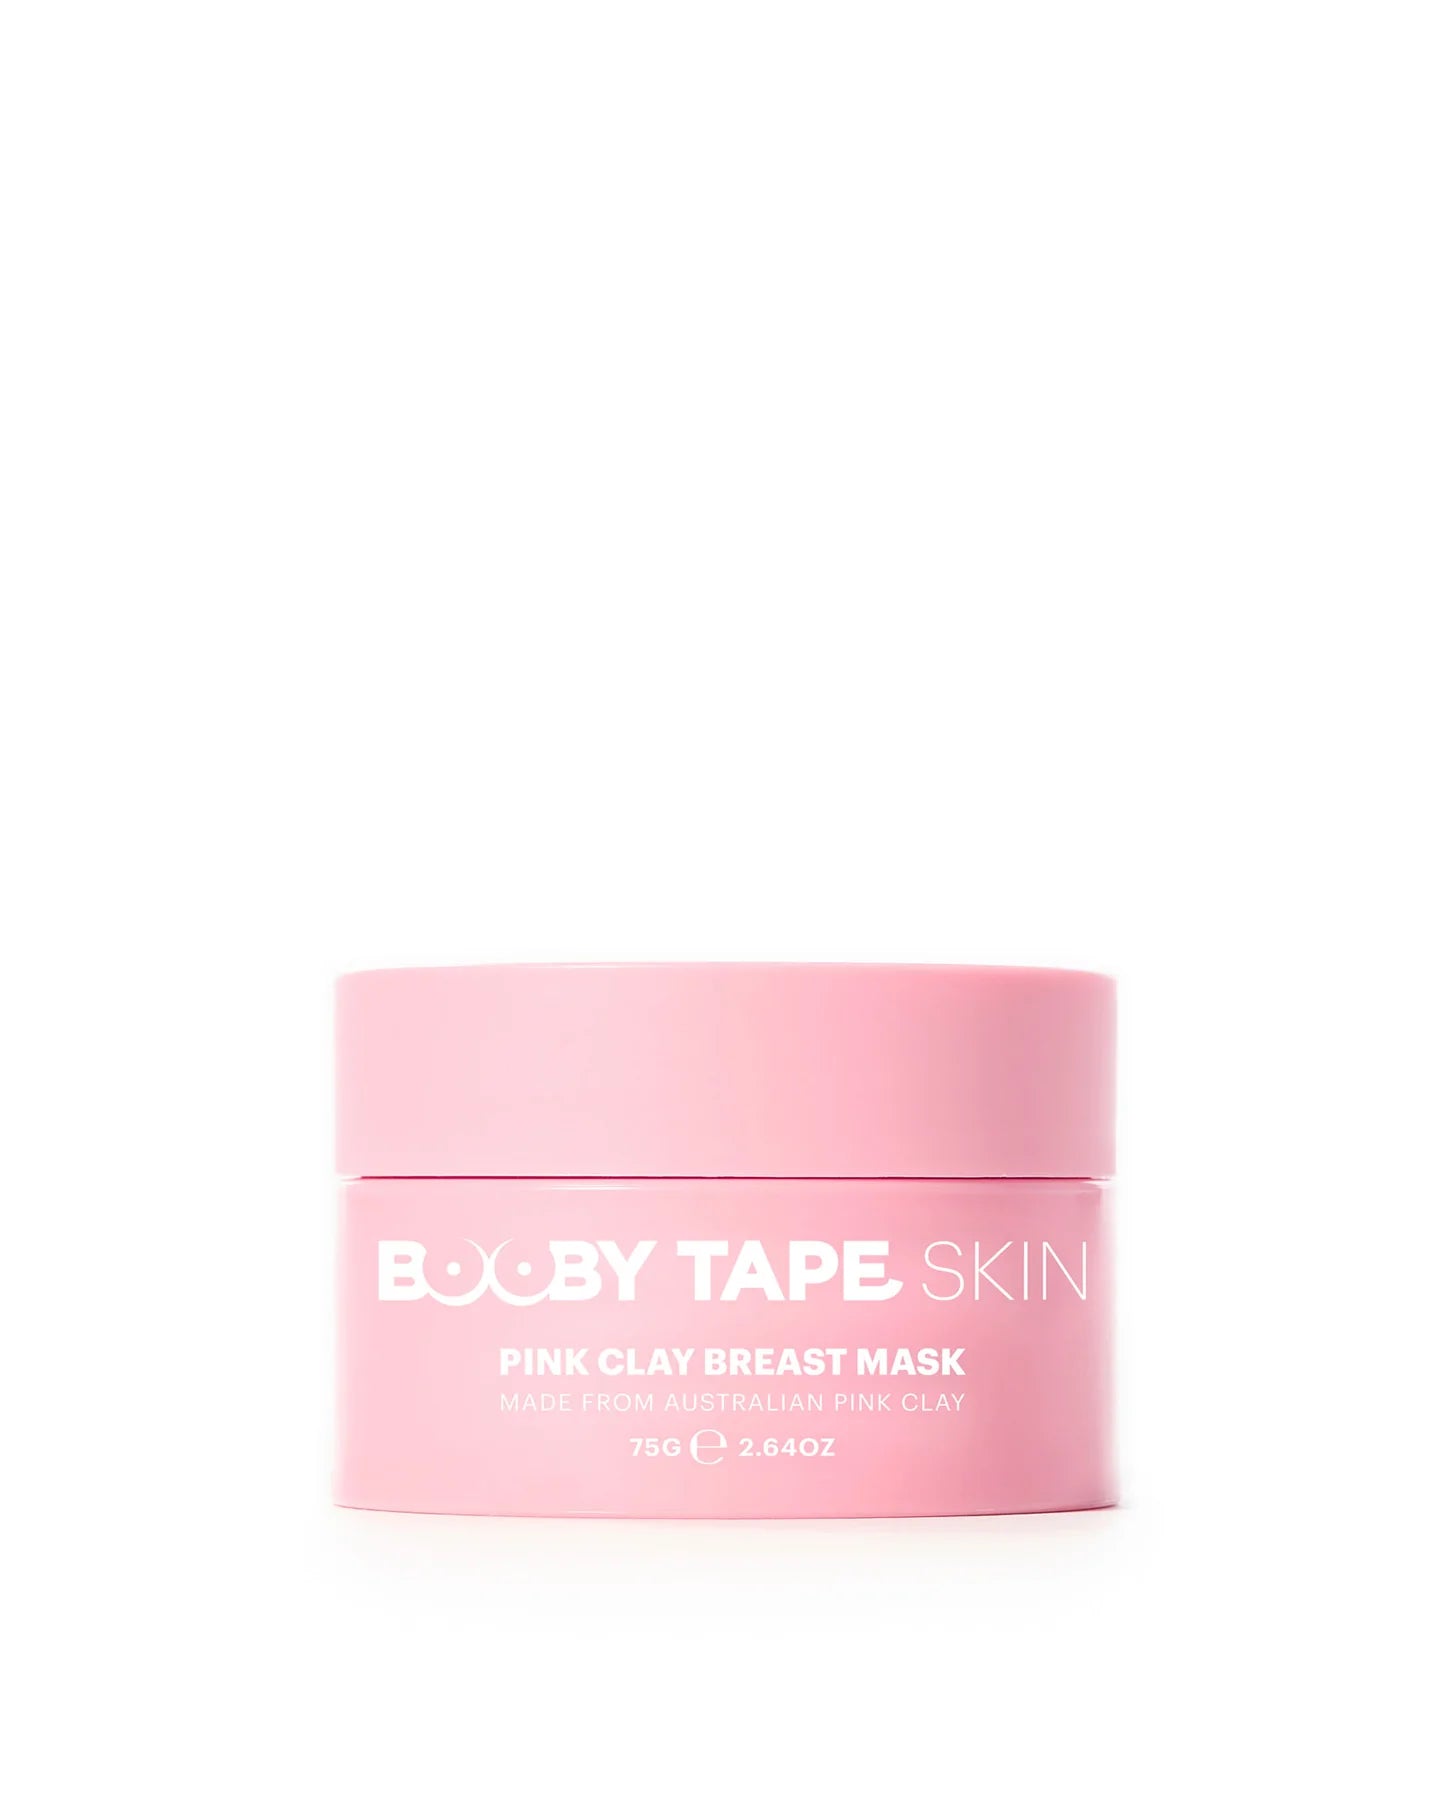 Booby Tape Skin Pink Clay Breast Mask